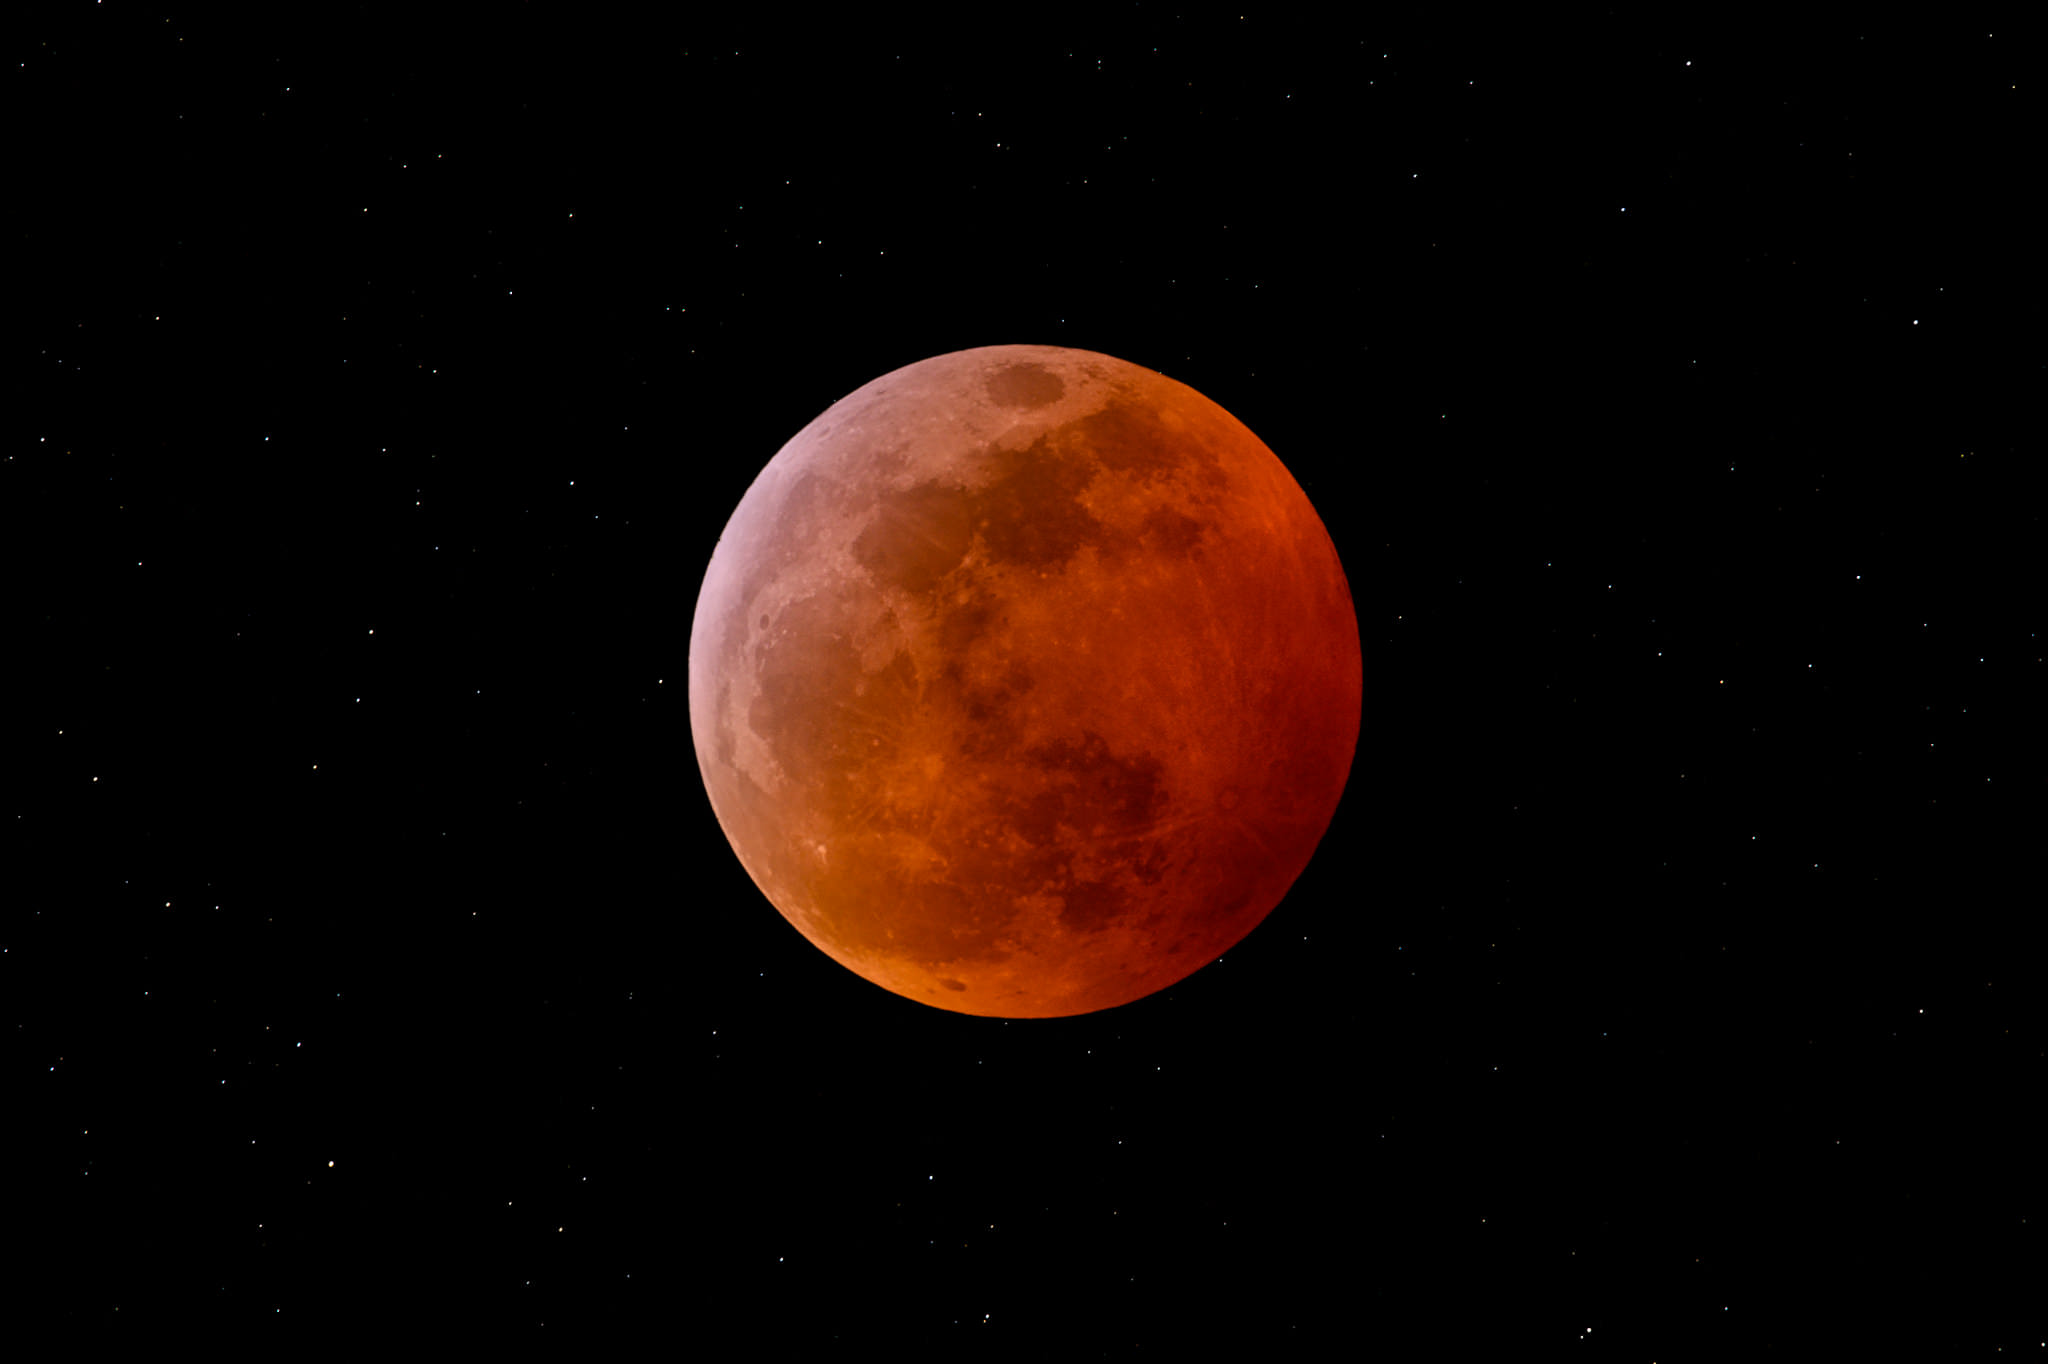 Lunar Eclipse 2022: Check Dos and Don'ts, timings, and other details here